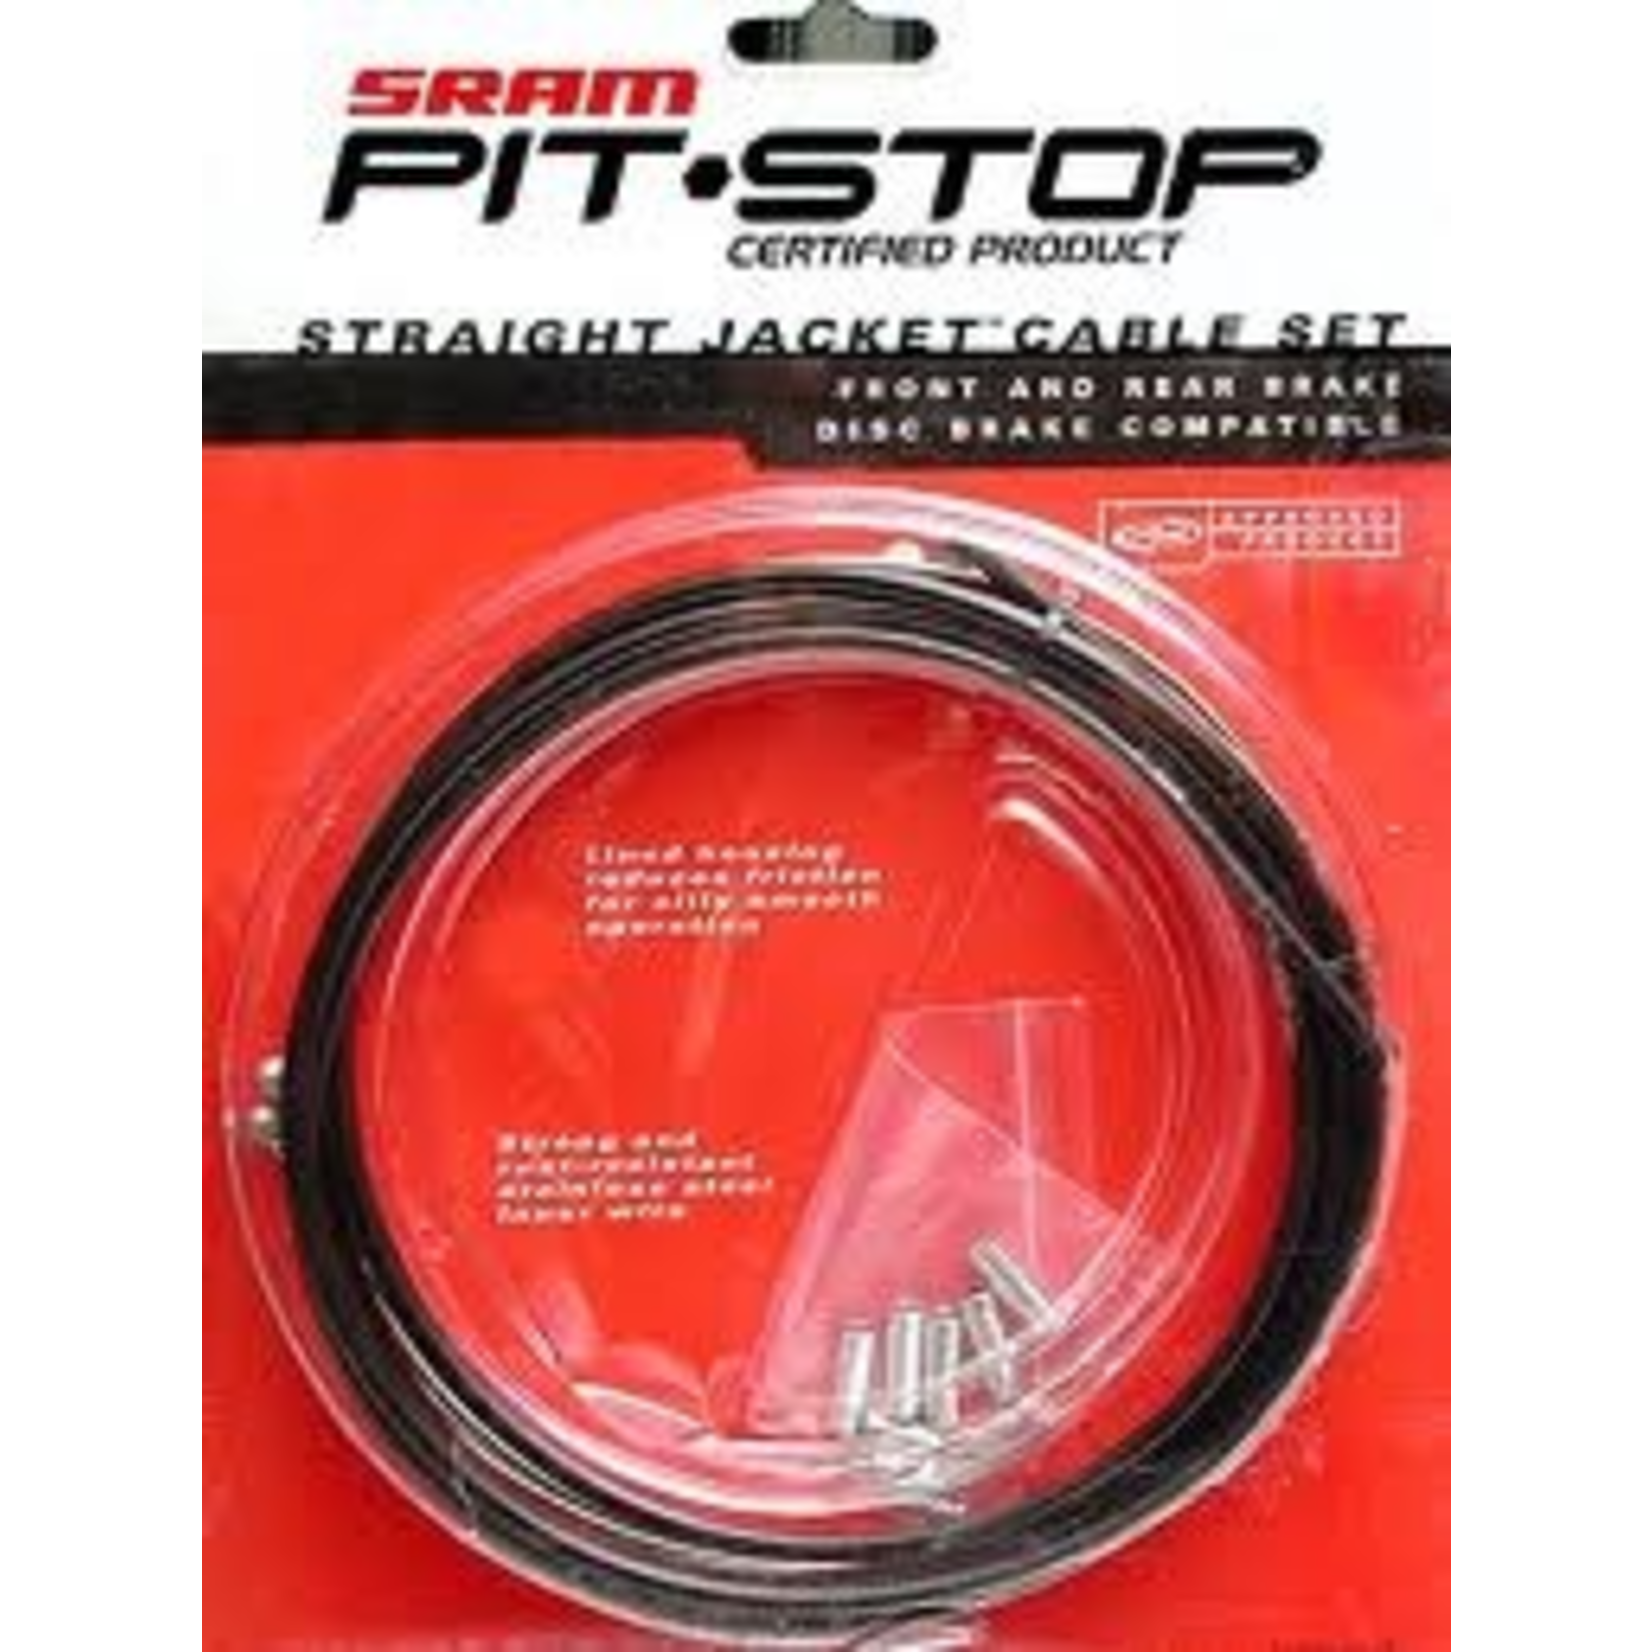 SRAM PIT STOP BRAKE CABLE AND HOUSEING AVID FLAK JACKET